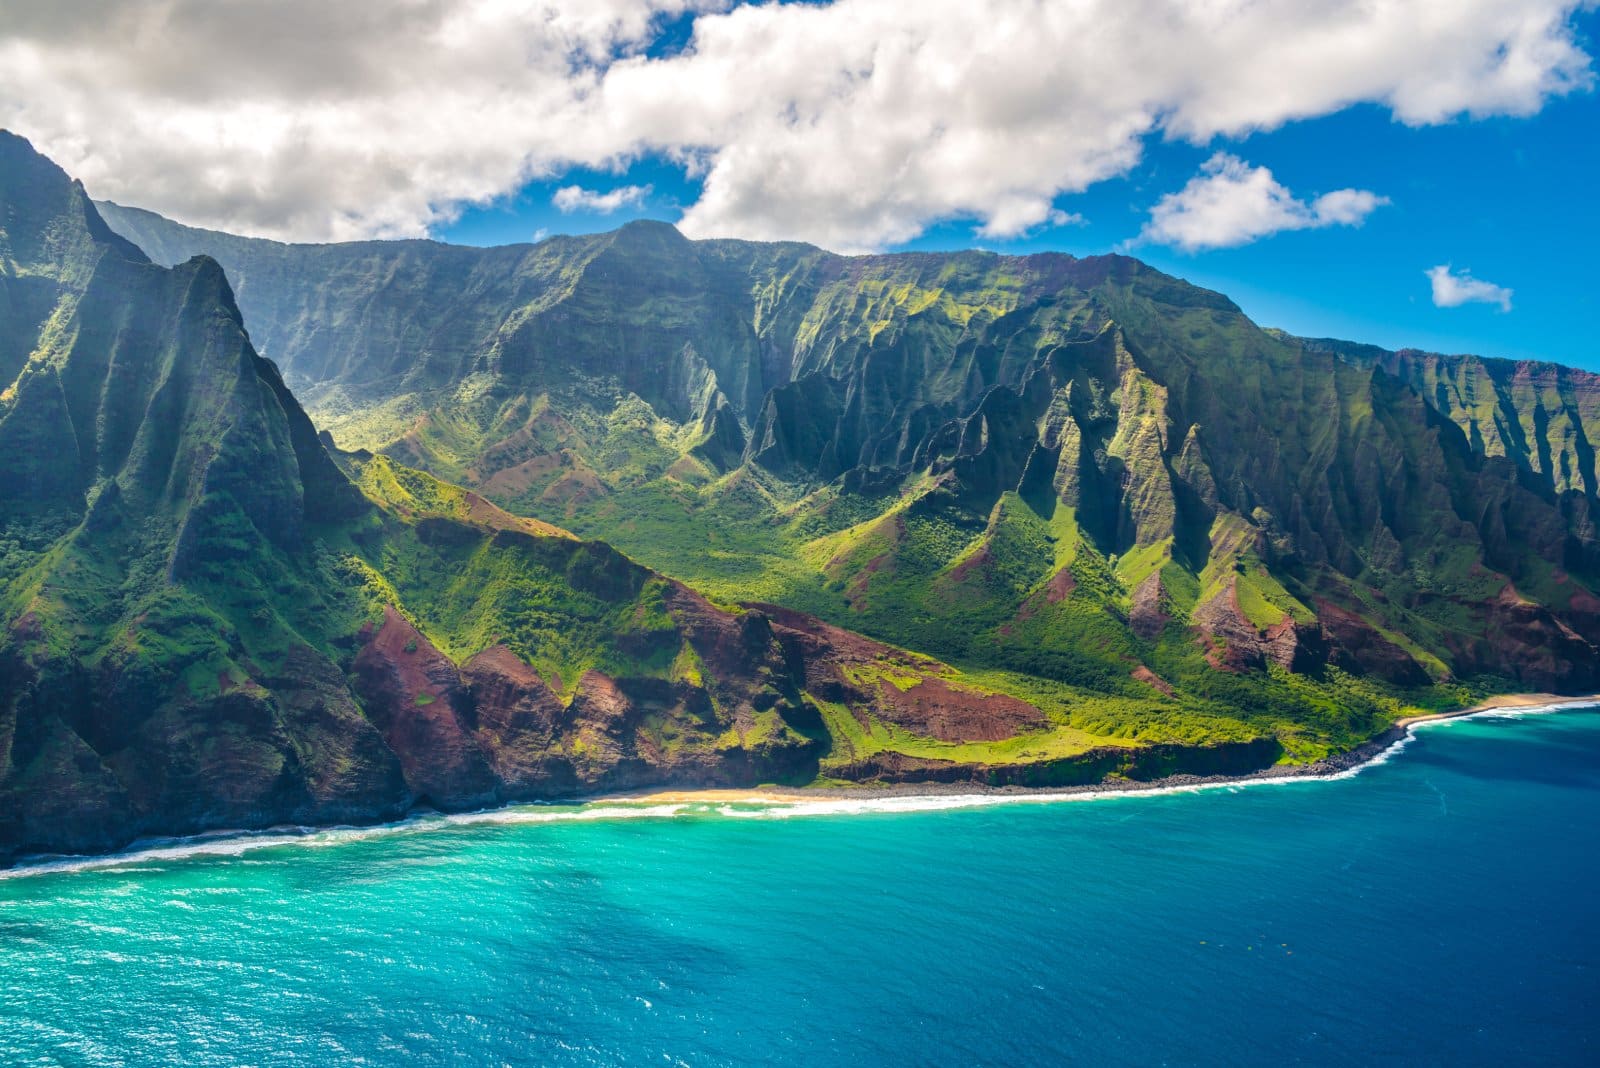 <p class="wp-caption-text">Image Credit: Shutterstock / Alexander Demyanenko</p>  <p><span>Accessible only by boat, helicopter, or a challenging hike, the Na Pali Coast on Kauai is a pristine paradise. It’s a landscape of towering sea cliffs, lush valleys, and waterfalls cascading into the ocean.</span></p>